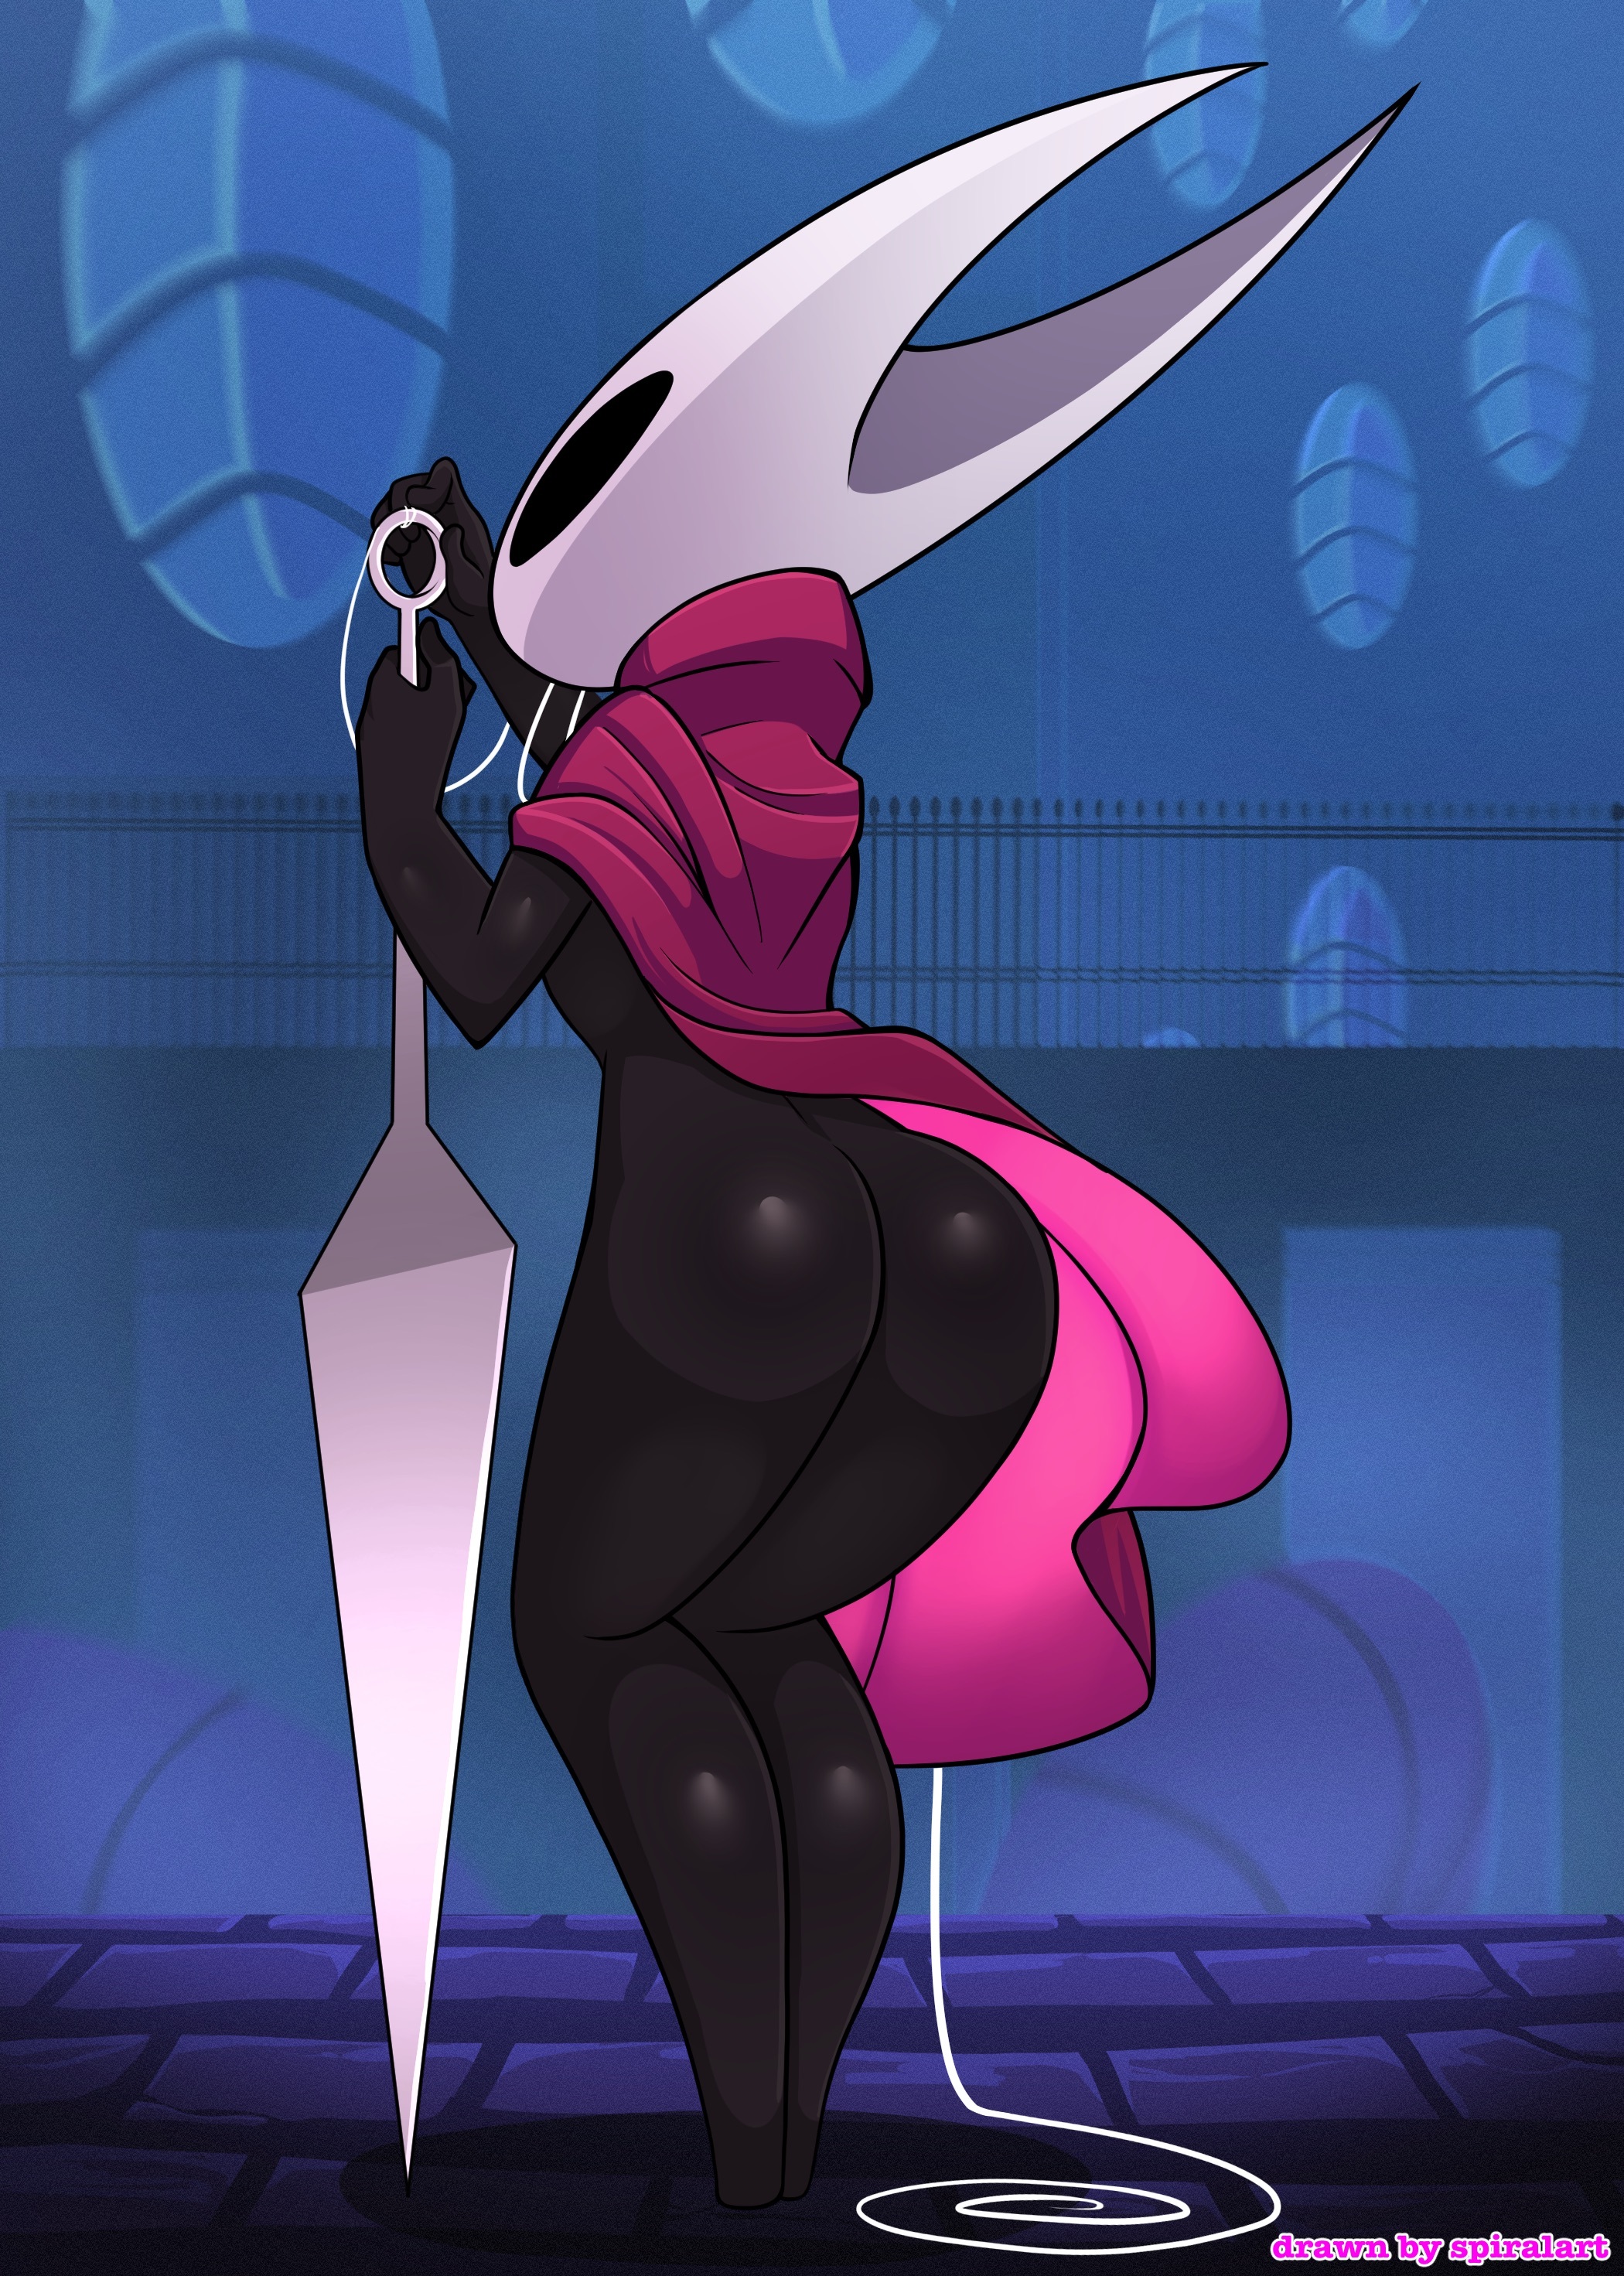 Explore the sensual side of hollow knight with hornet r34